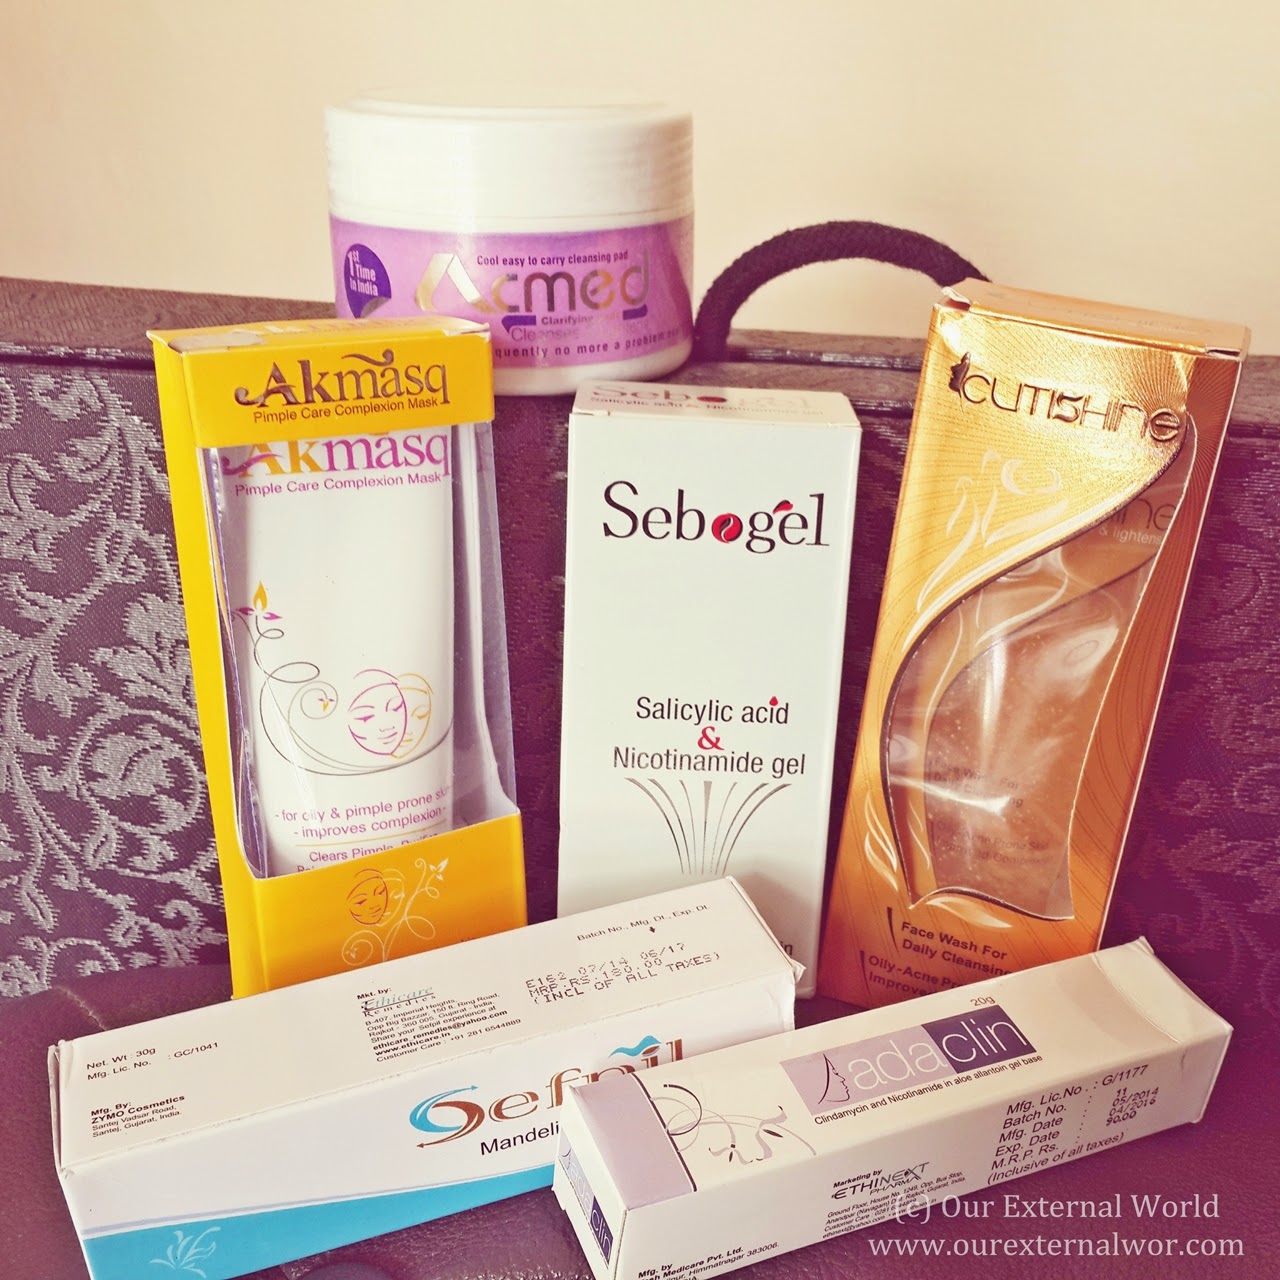 Ethicare & Ethinext Acne Care - How To Treat Acne For Oily-Skin